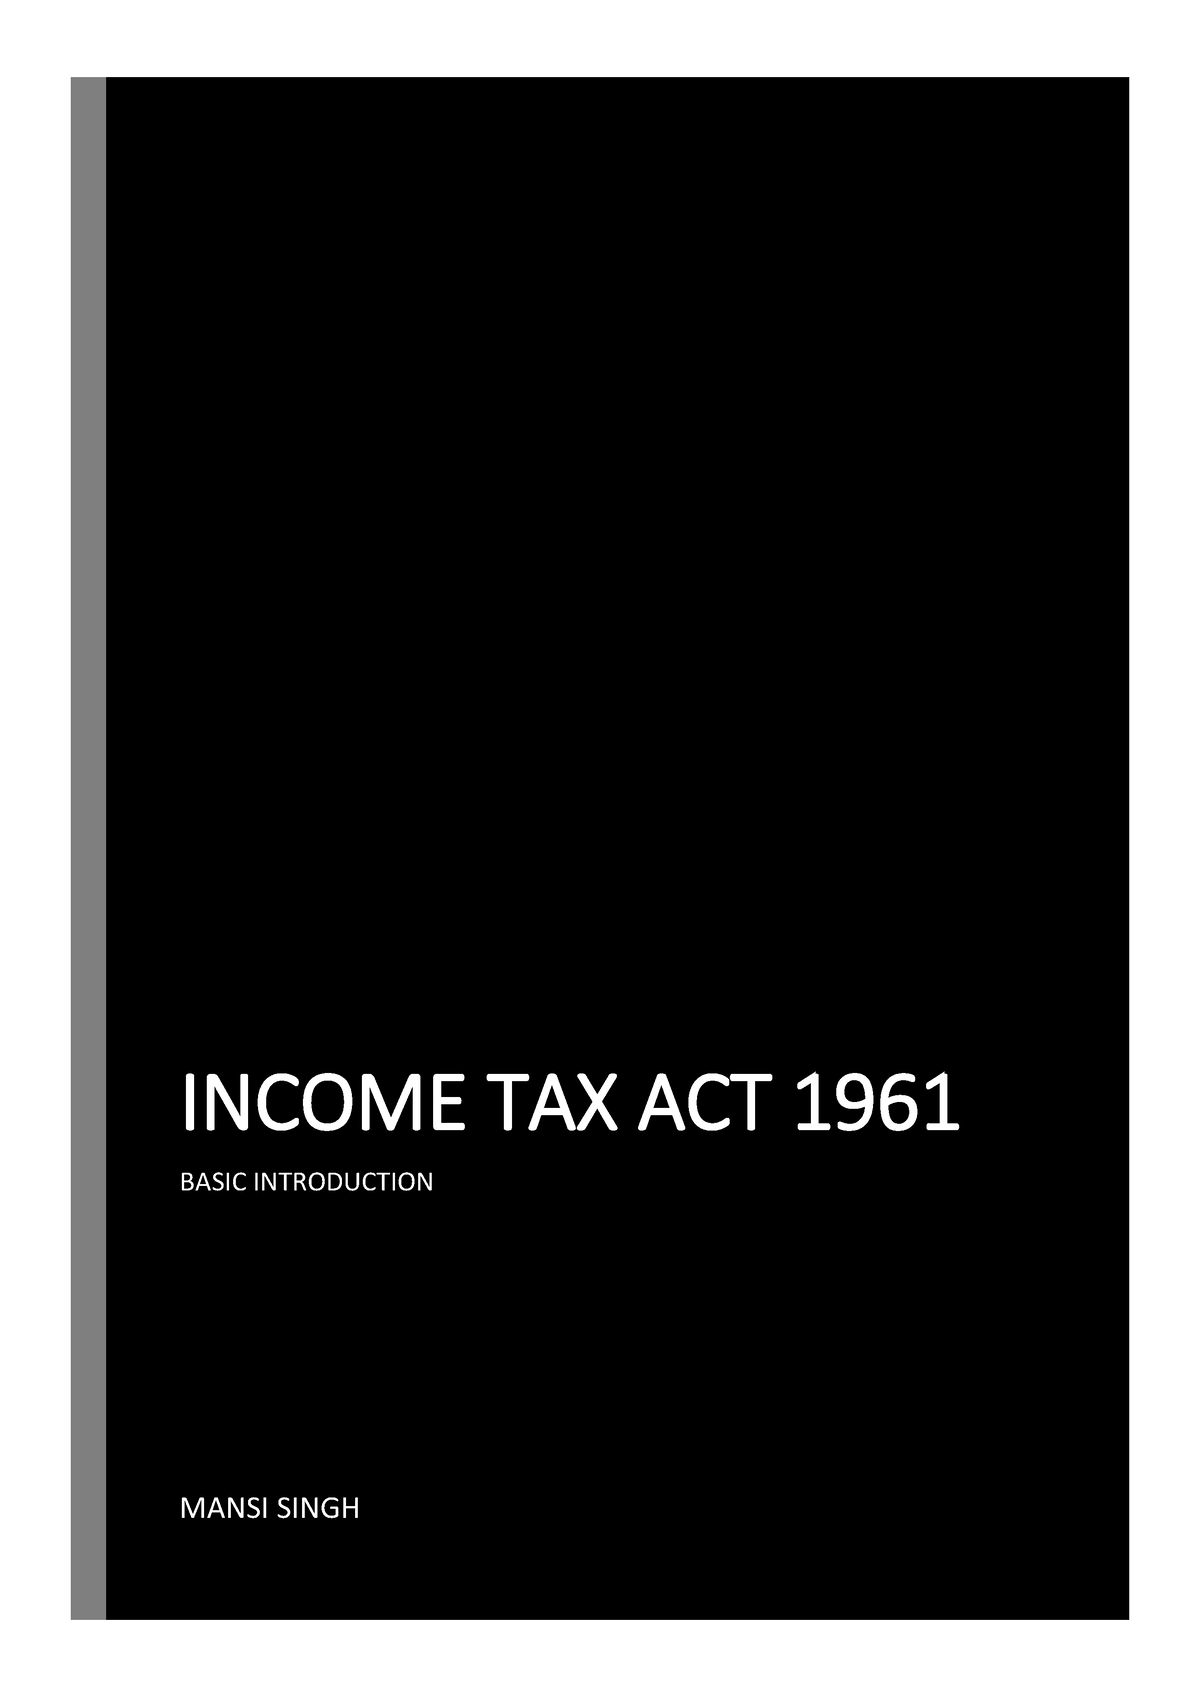 income-tax-act-1961-income-tax-act-1961-basic-introduction